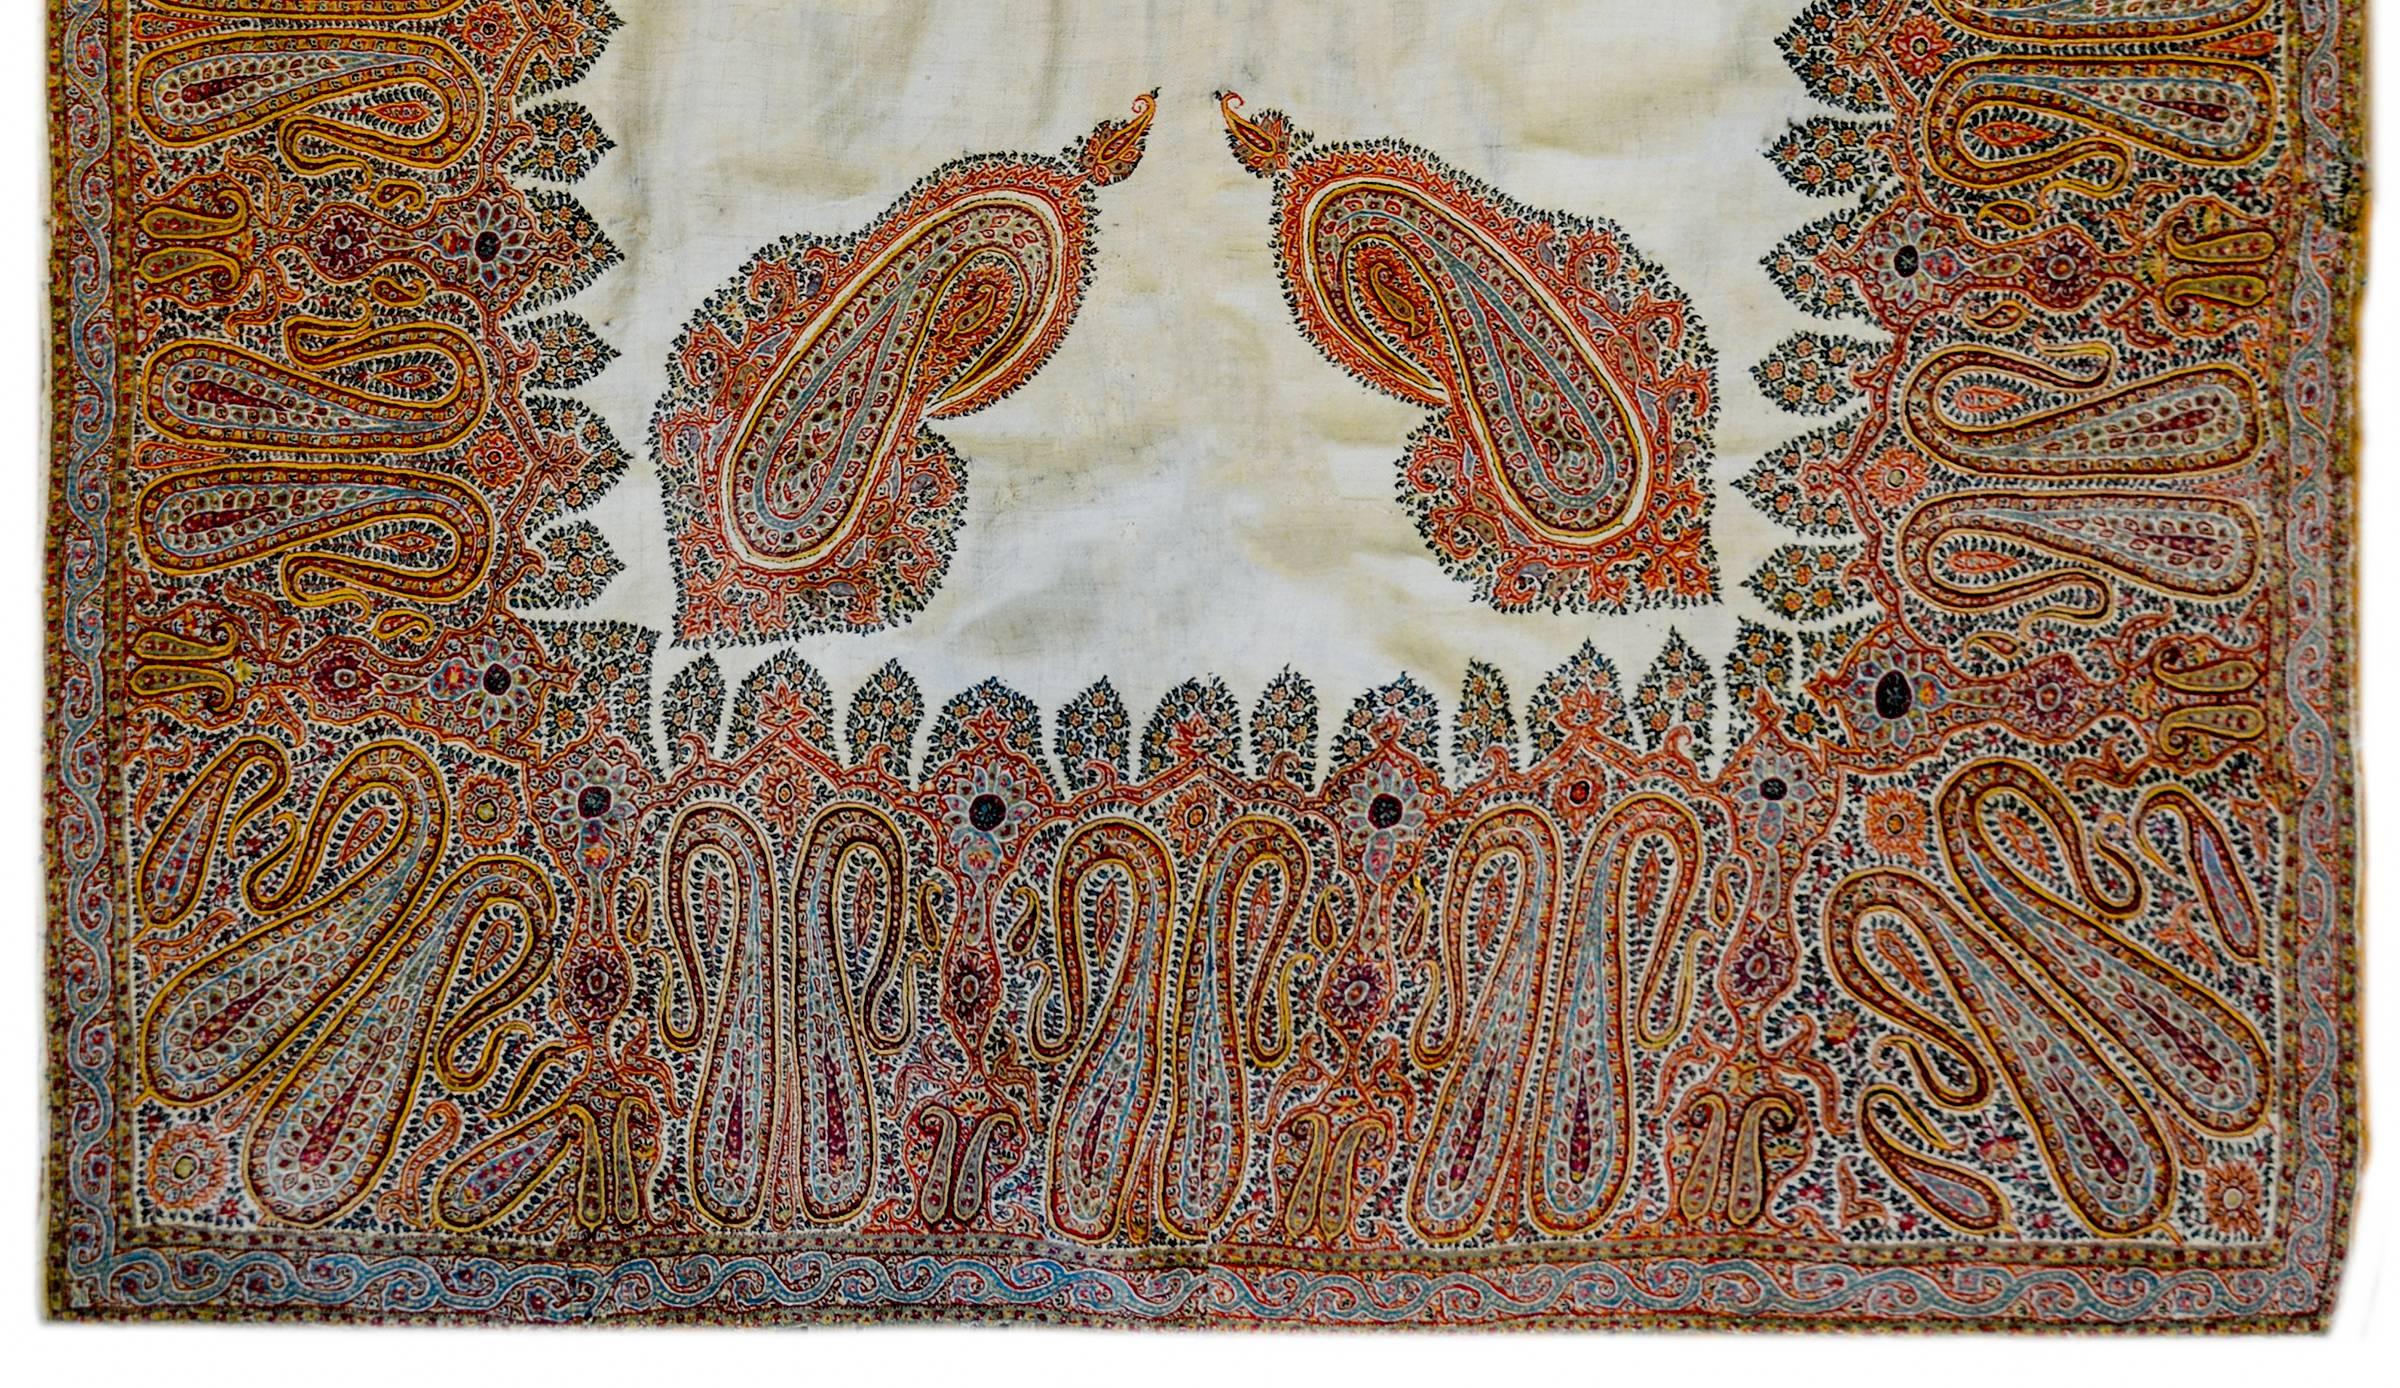 An unbelievable early 20th century Kirman silk embroidered Suzani textile with a beautiful pattern of densely embroidered paisley pattern woven in myriad colors of silk thread surrounding a relatively empty field containing four large paisley shapes.